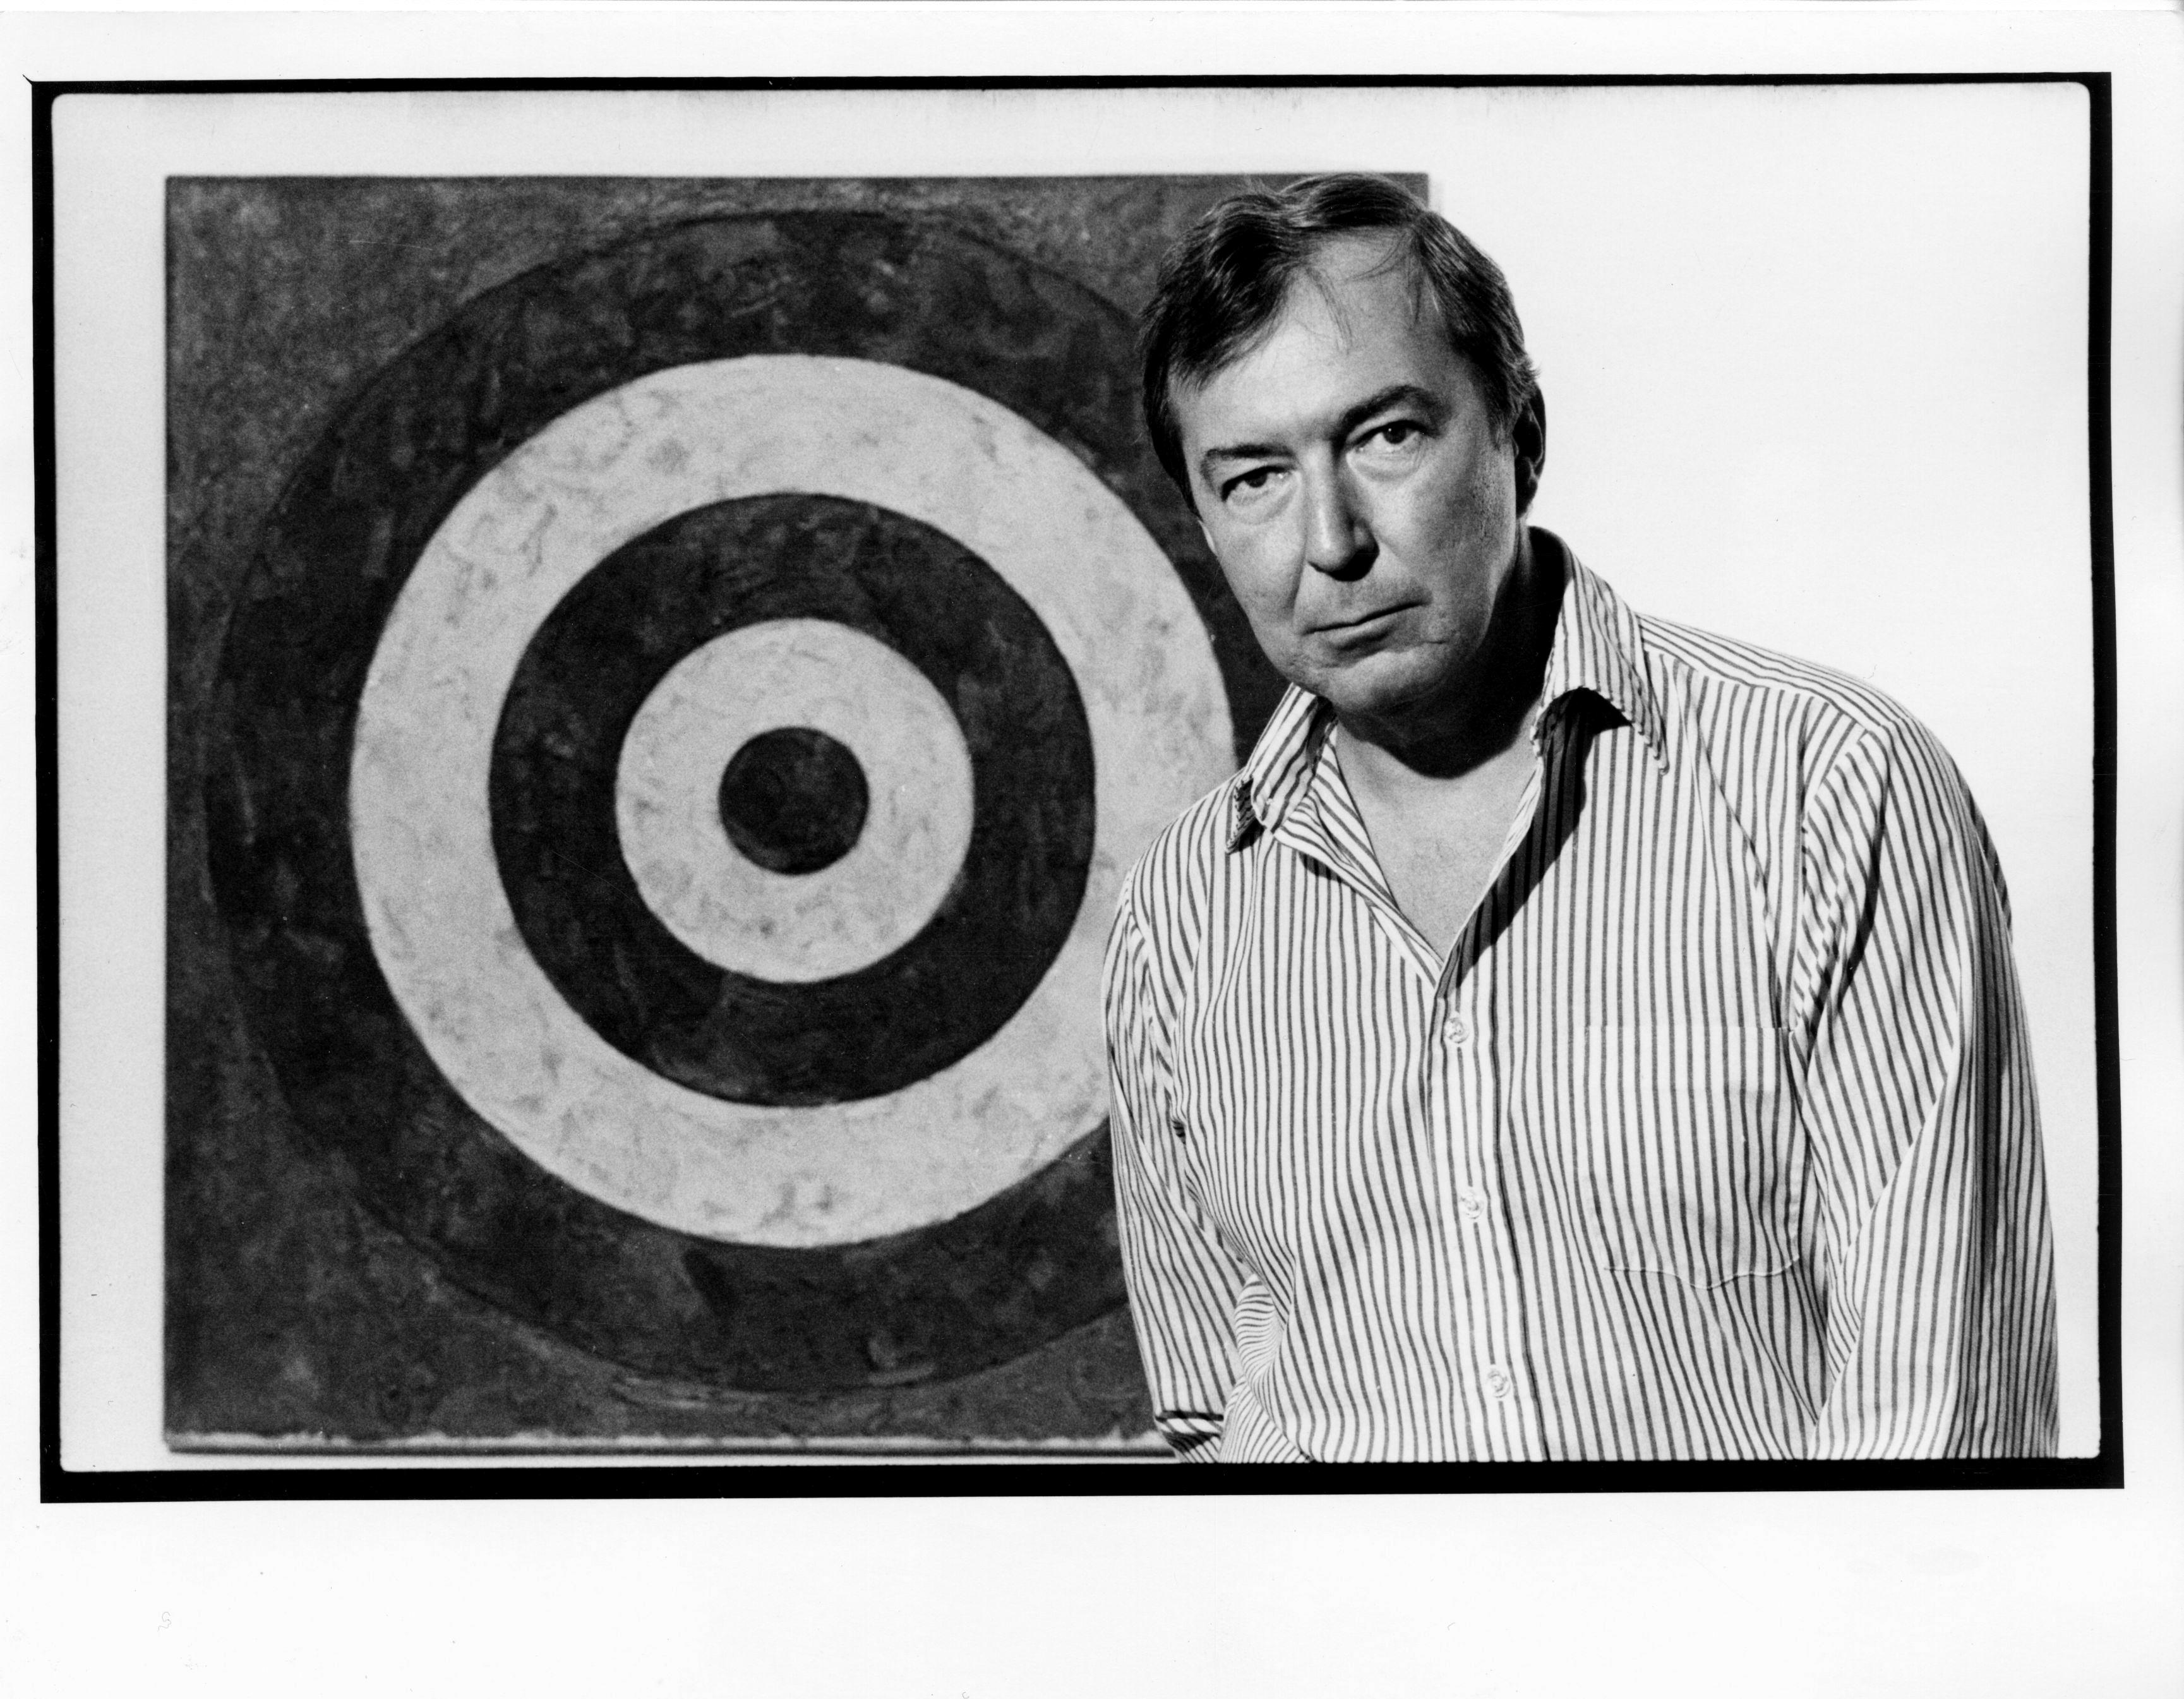 Jack Mitchell Portrait Photograph - Pop Artist Jasper Johns at the Whitney Museum exhibition of his work